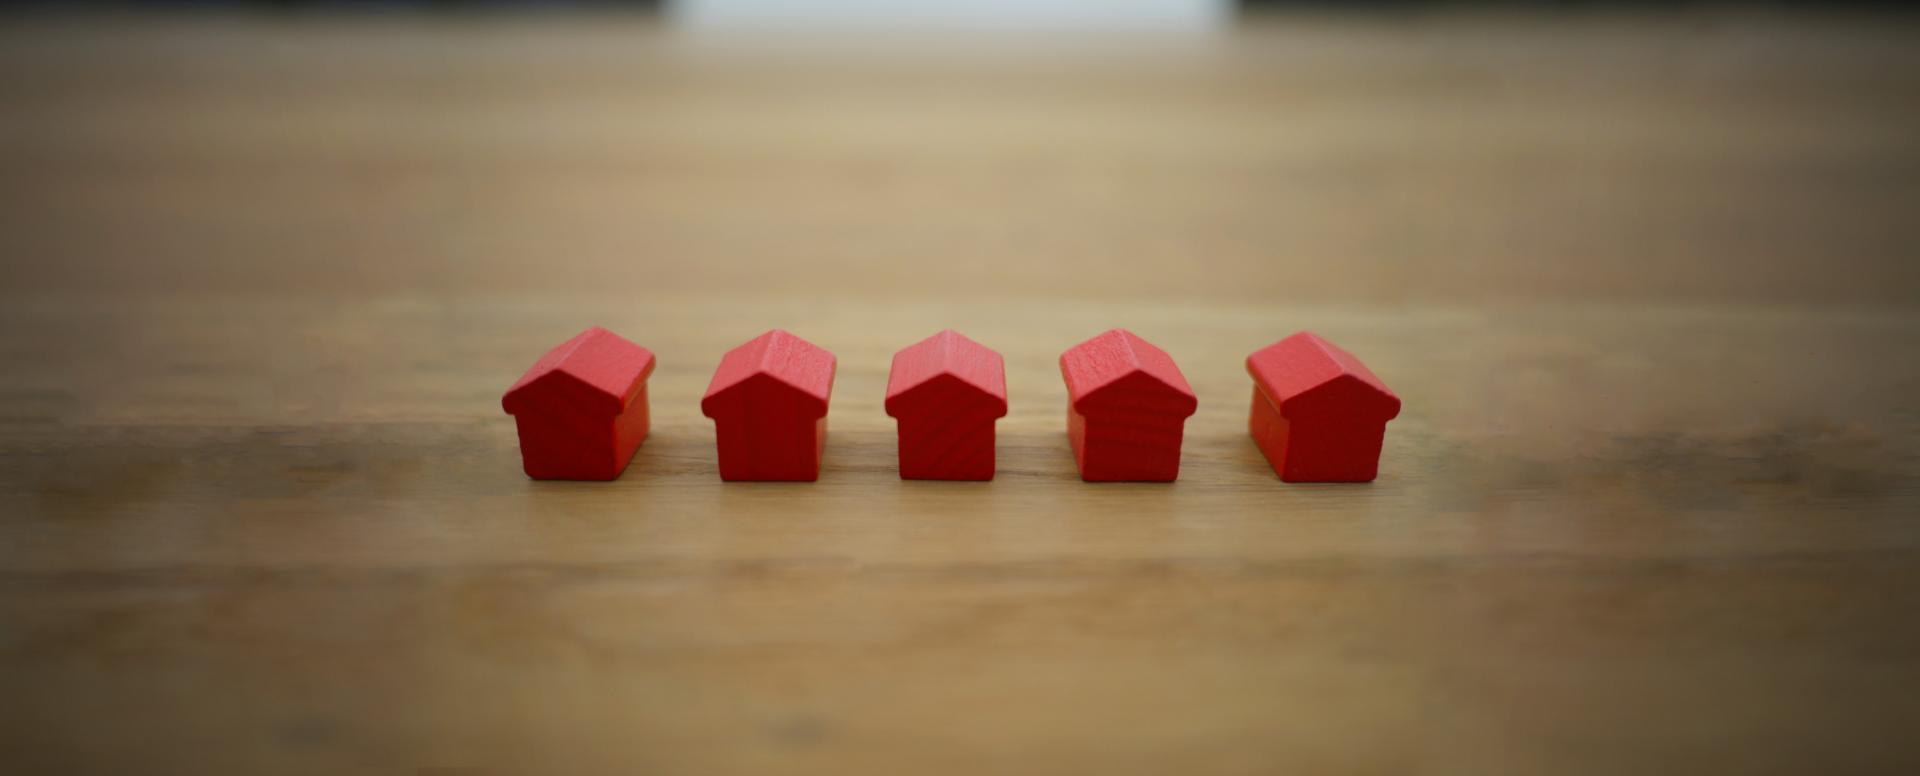 Five tiny red wooden house blocks on a wooden table